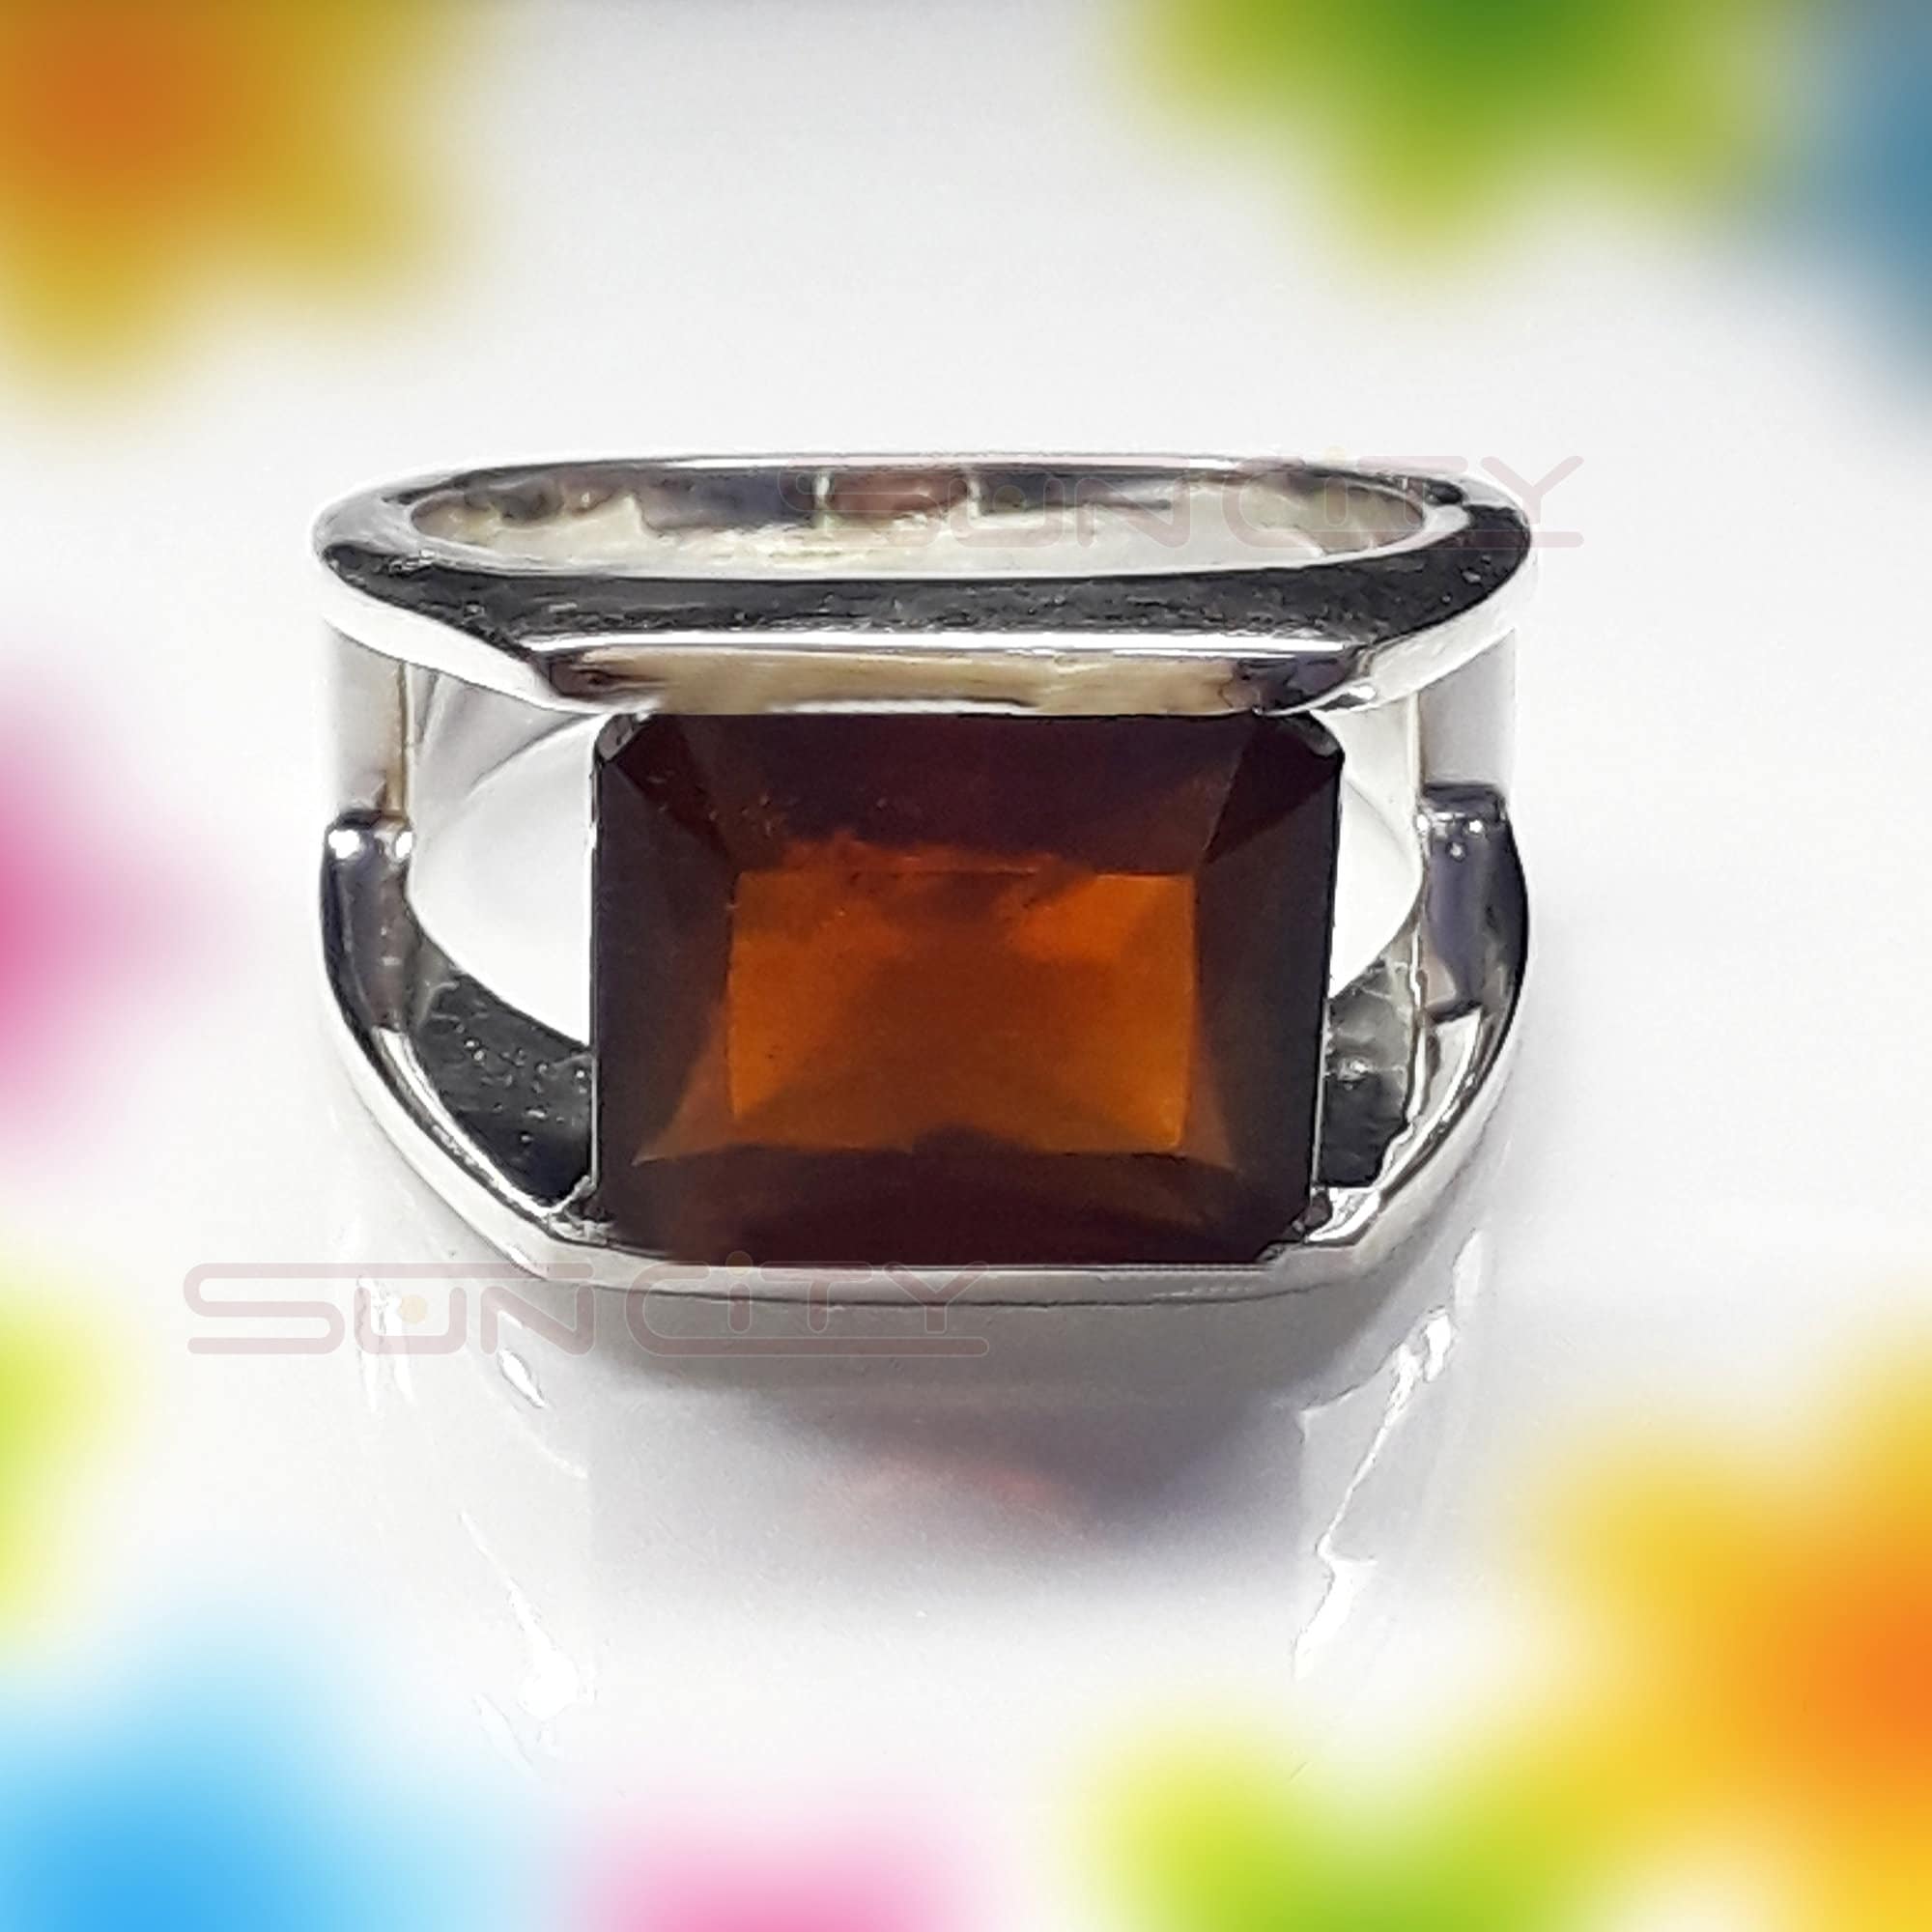 Buy SIDHARTH GEMS Gomed Ring 9.25 Ratti Silver Plated Natural and Certified  Hessonite Garnet (Gomed) Astrological Gemstone Adjustable for Men and Women  at Amazon.in